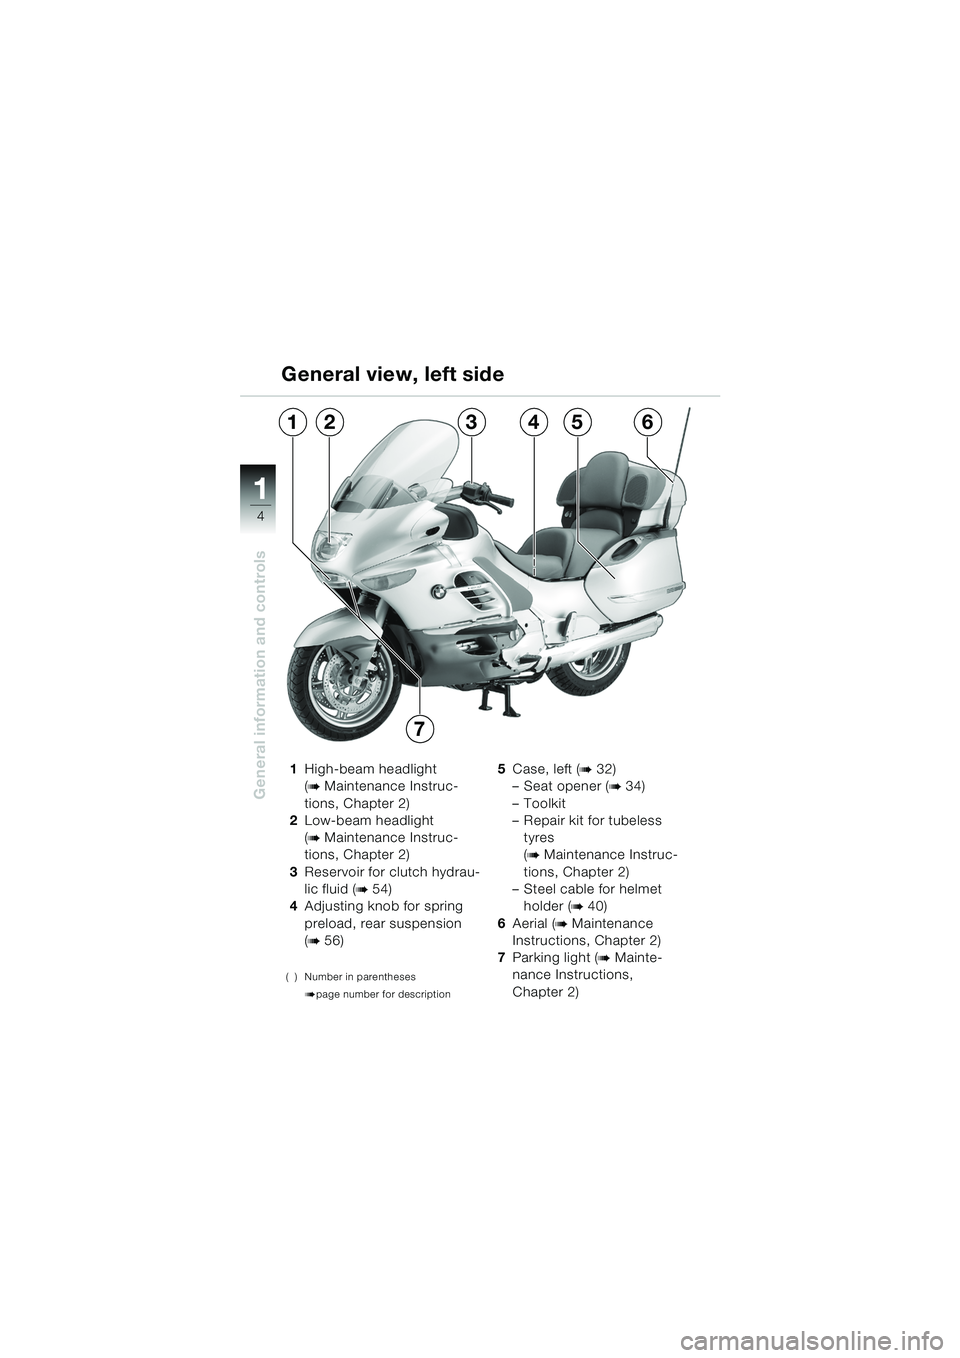 BMW MOTORRAD K 1200 LT 2005  Riders Manual (in English) 4
General information and controls
1
1High-beam headlight 
(
bMaintenance Instruc-
tions, Chapter 2)
2 Low-beam headlight 
(
bMaintenance Instruc-
tions, Chapter 2)
3 Reservoir for clutch hydrau-
lic 